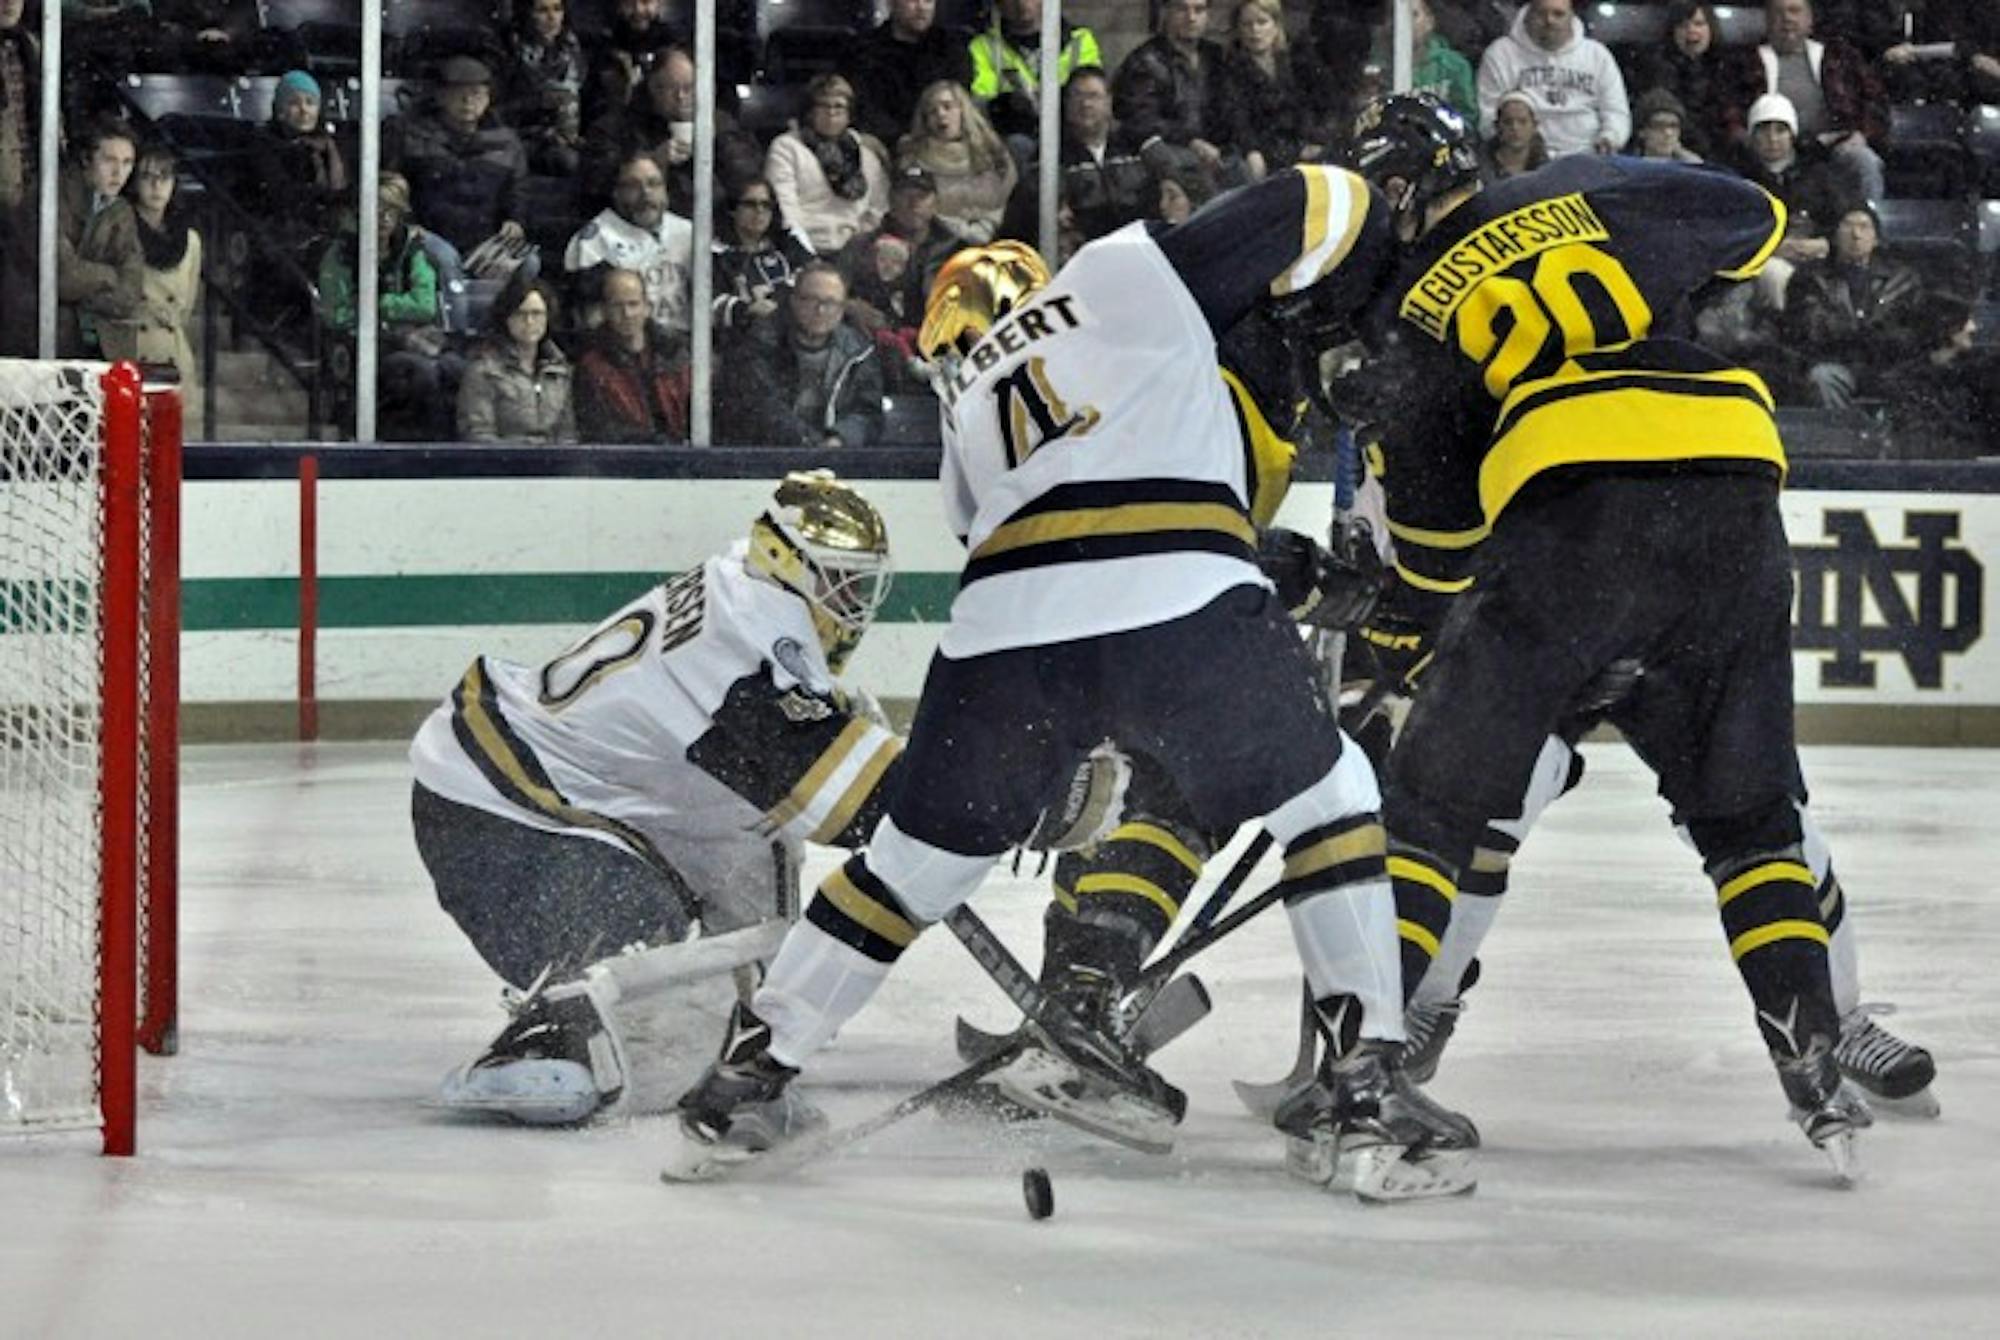 Irish sophomore goaltender Cal Petersen attempts to keep the puck out of his net during a 7-2 victory over Merrimack on Jan. 15. Petersen was recently named Hockey East goalie of the month for January.